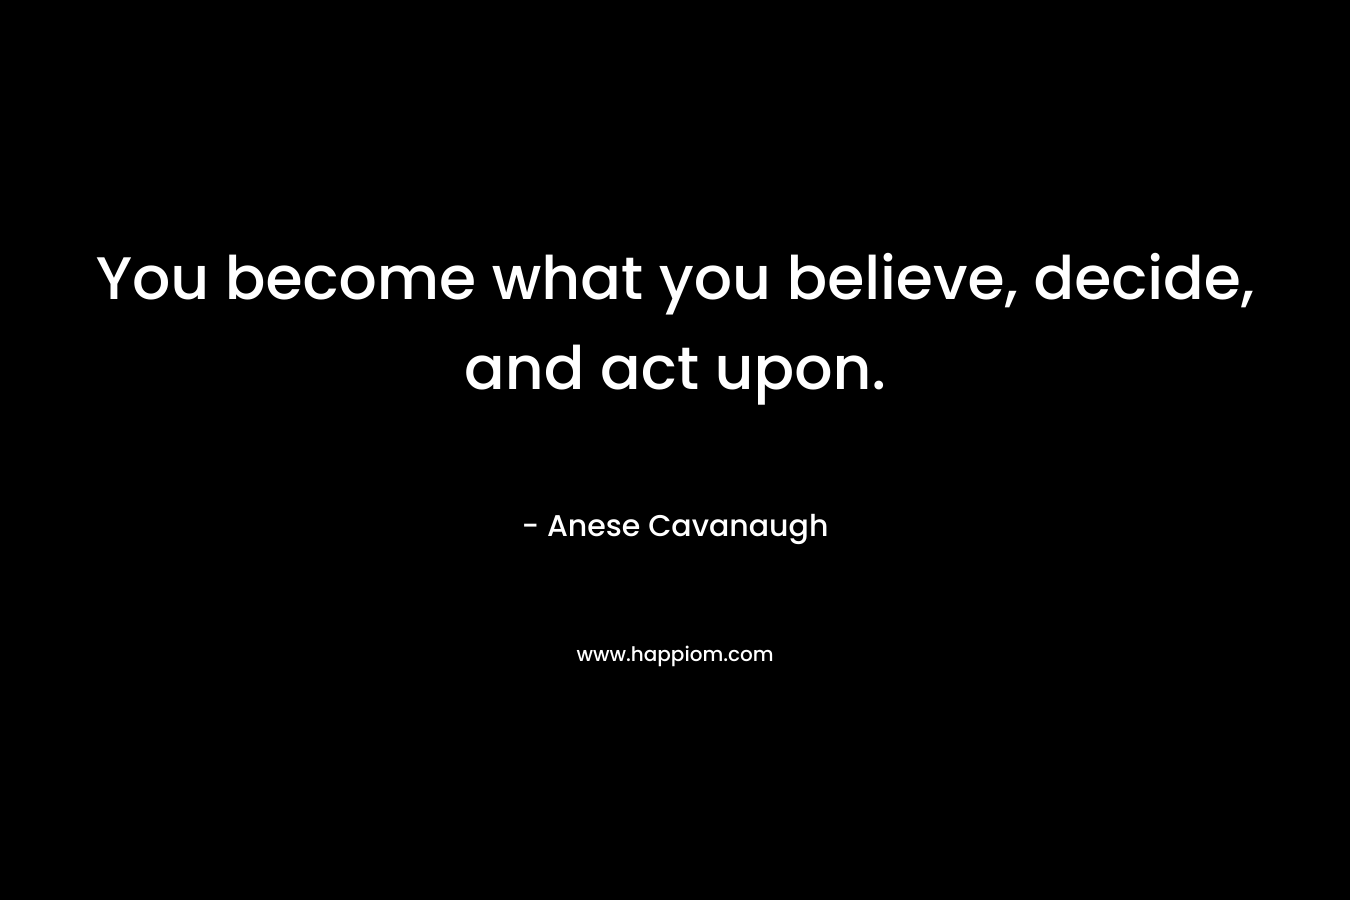 You become what you believe, decide, and act upon.